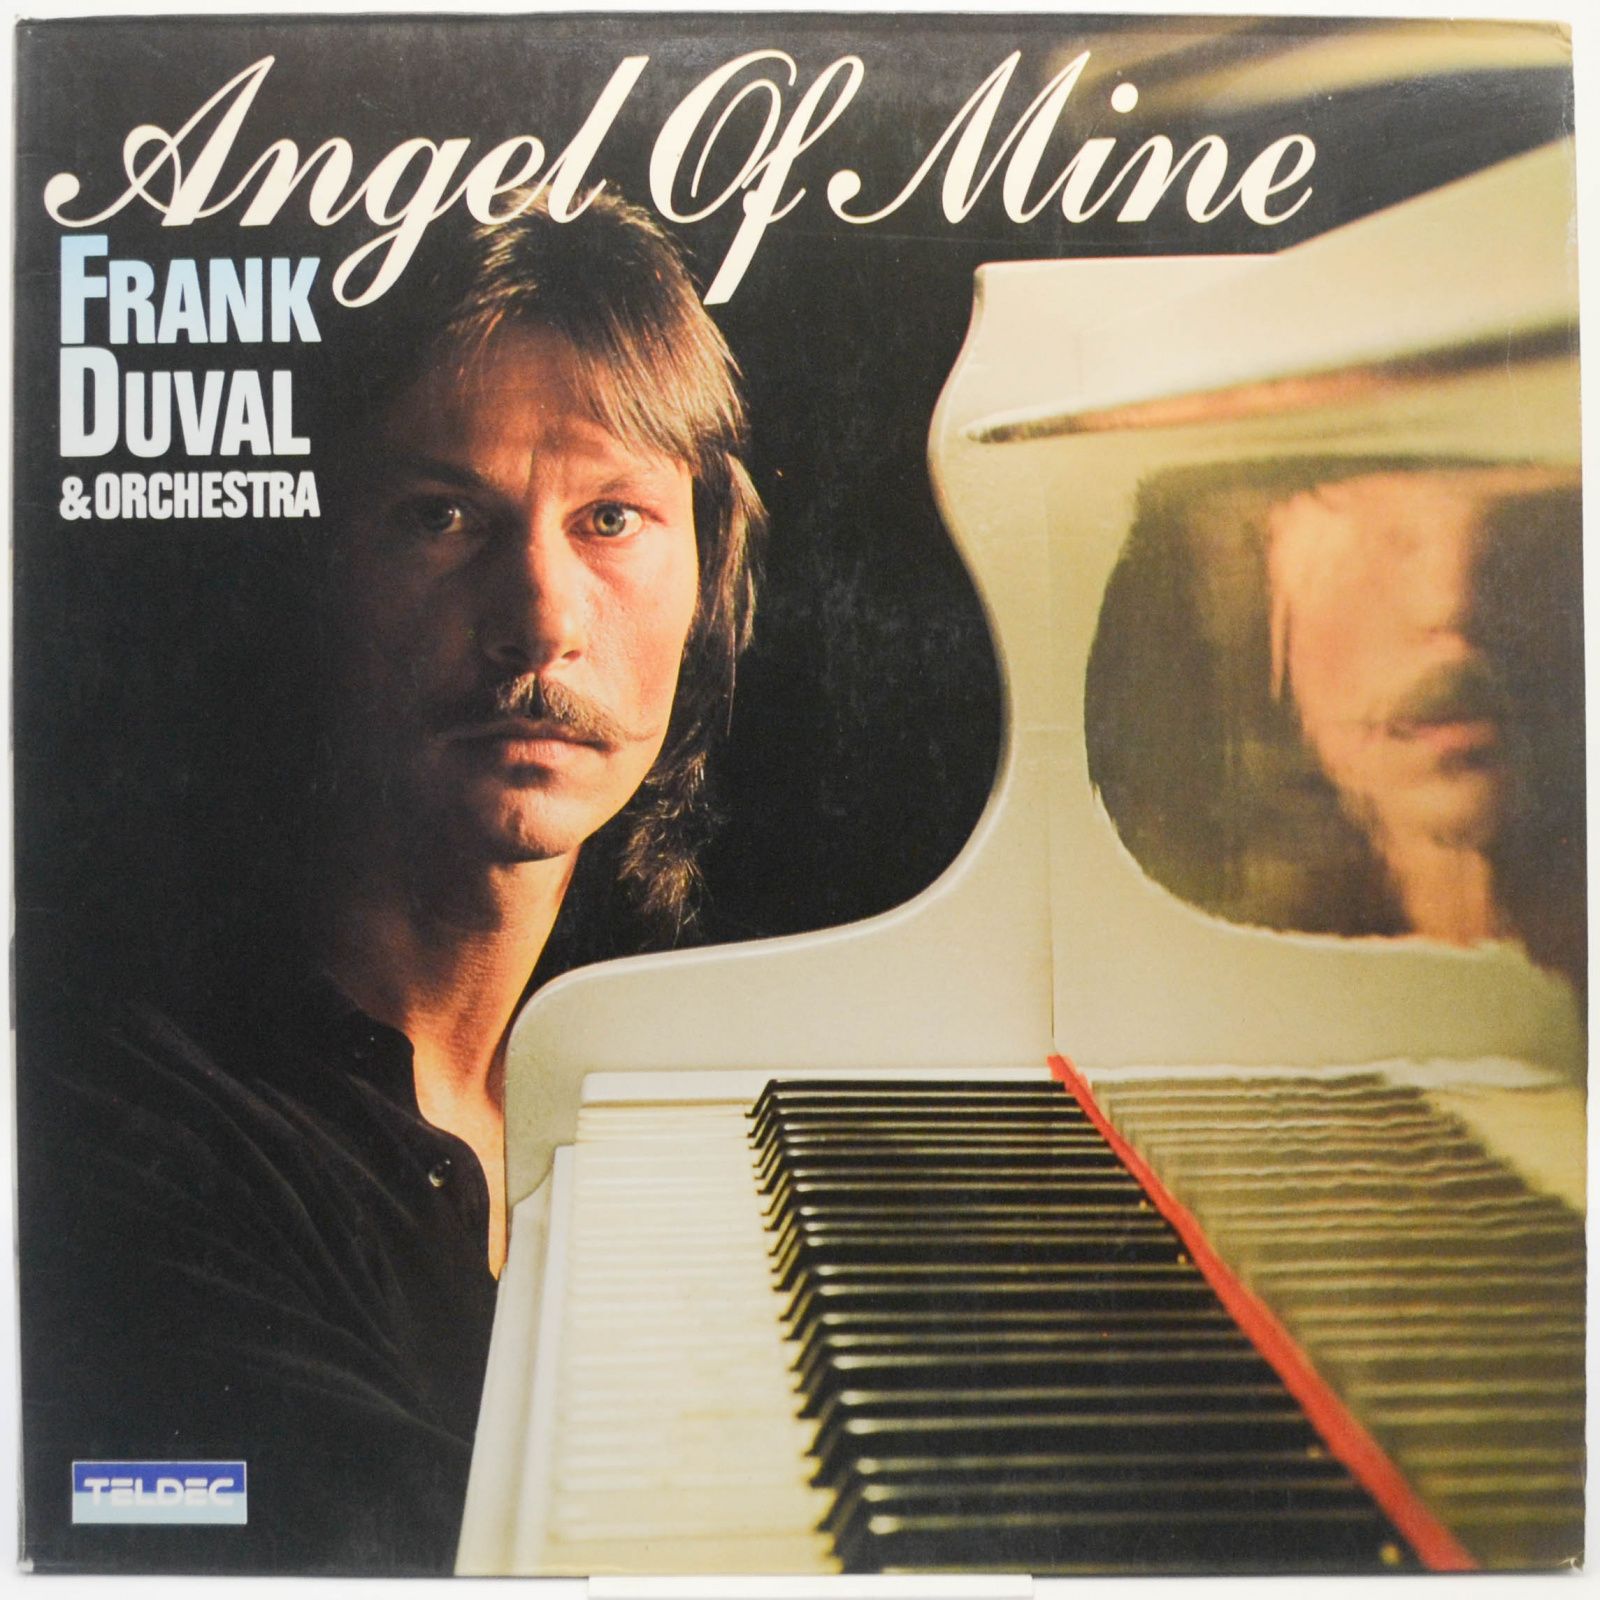 Frank Duval & Orchestra — Angel Of Mine, 1981